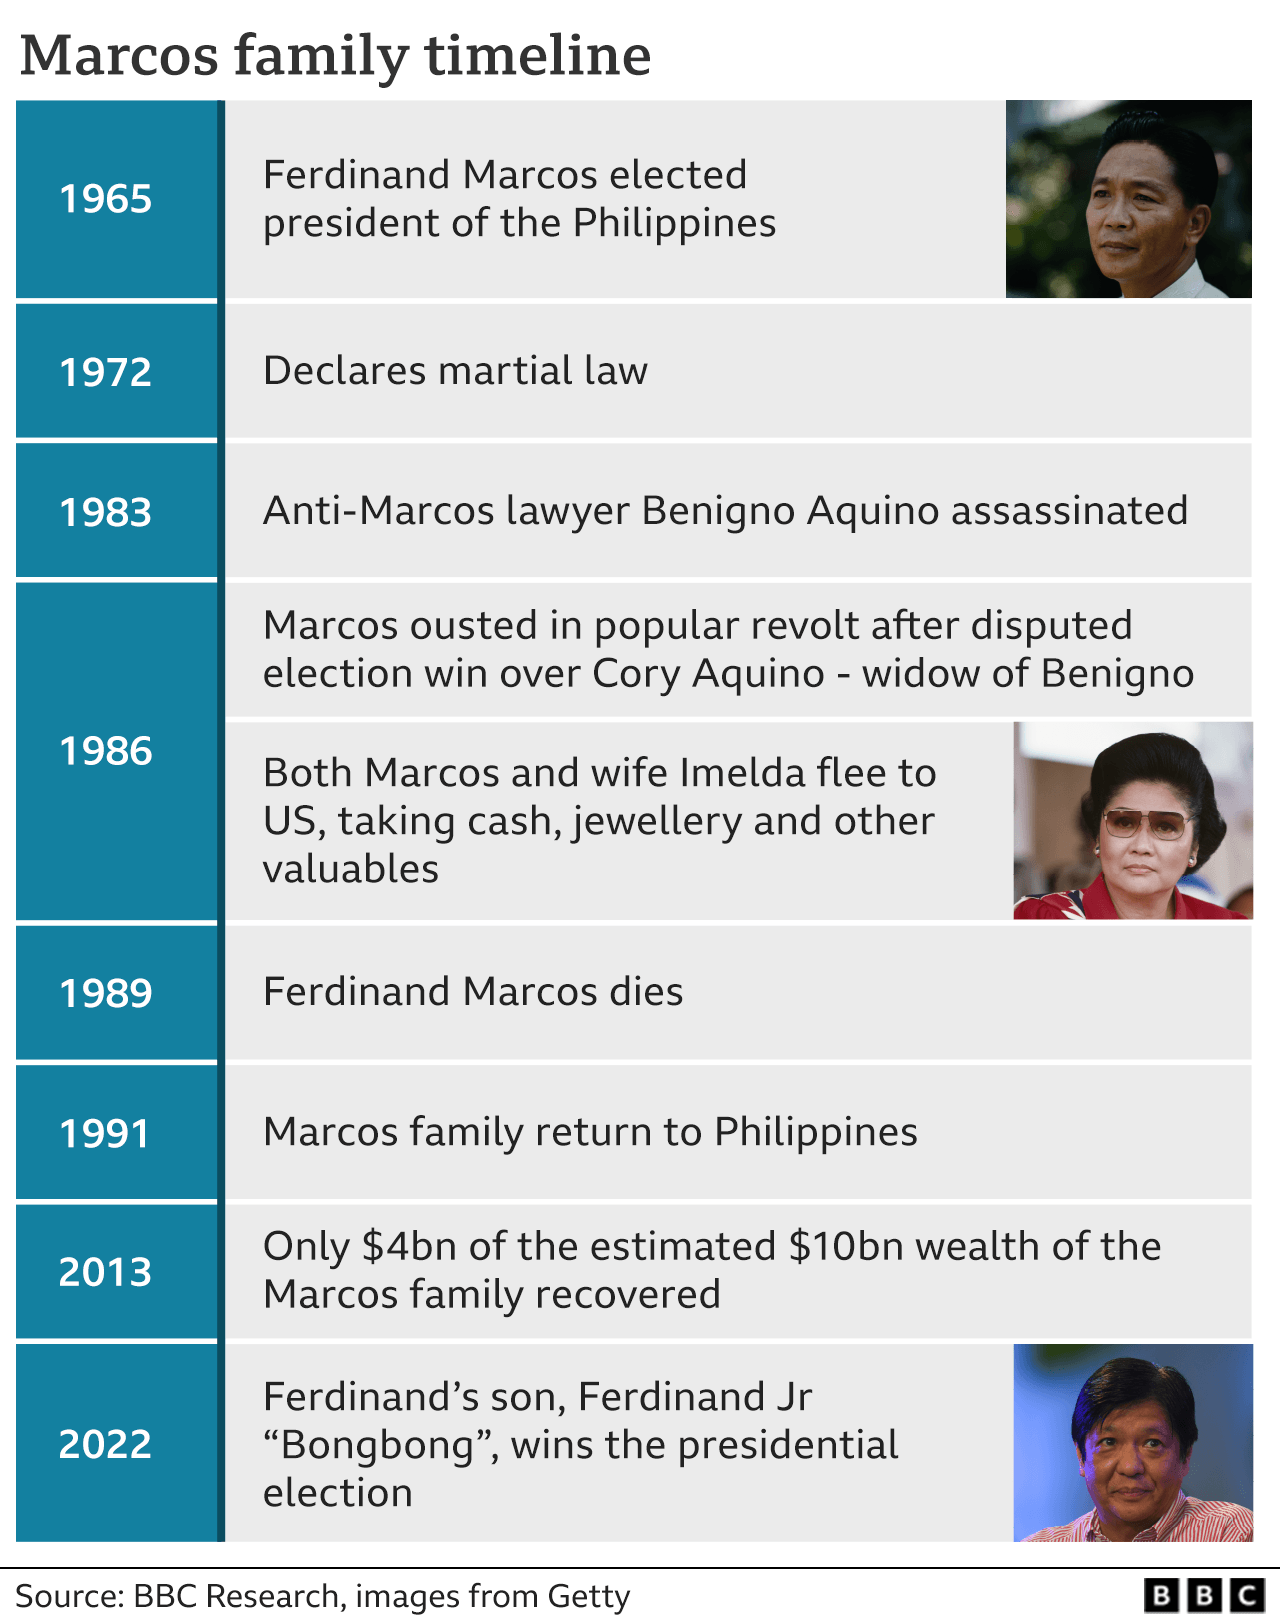 Graphic shows a timeline of the Marcos family